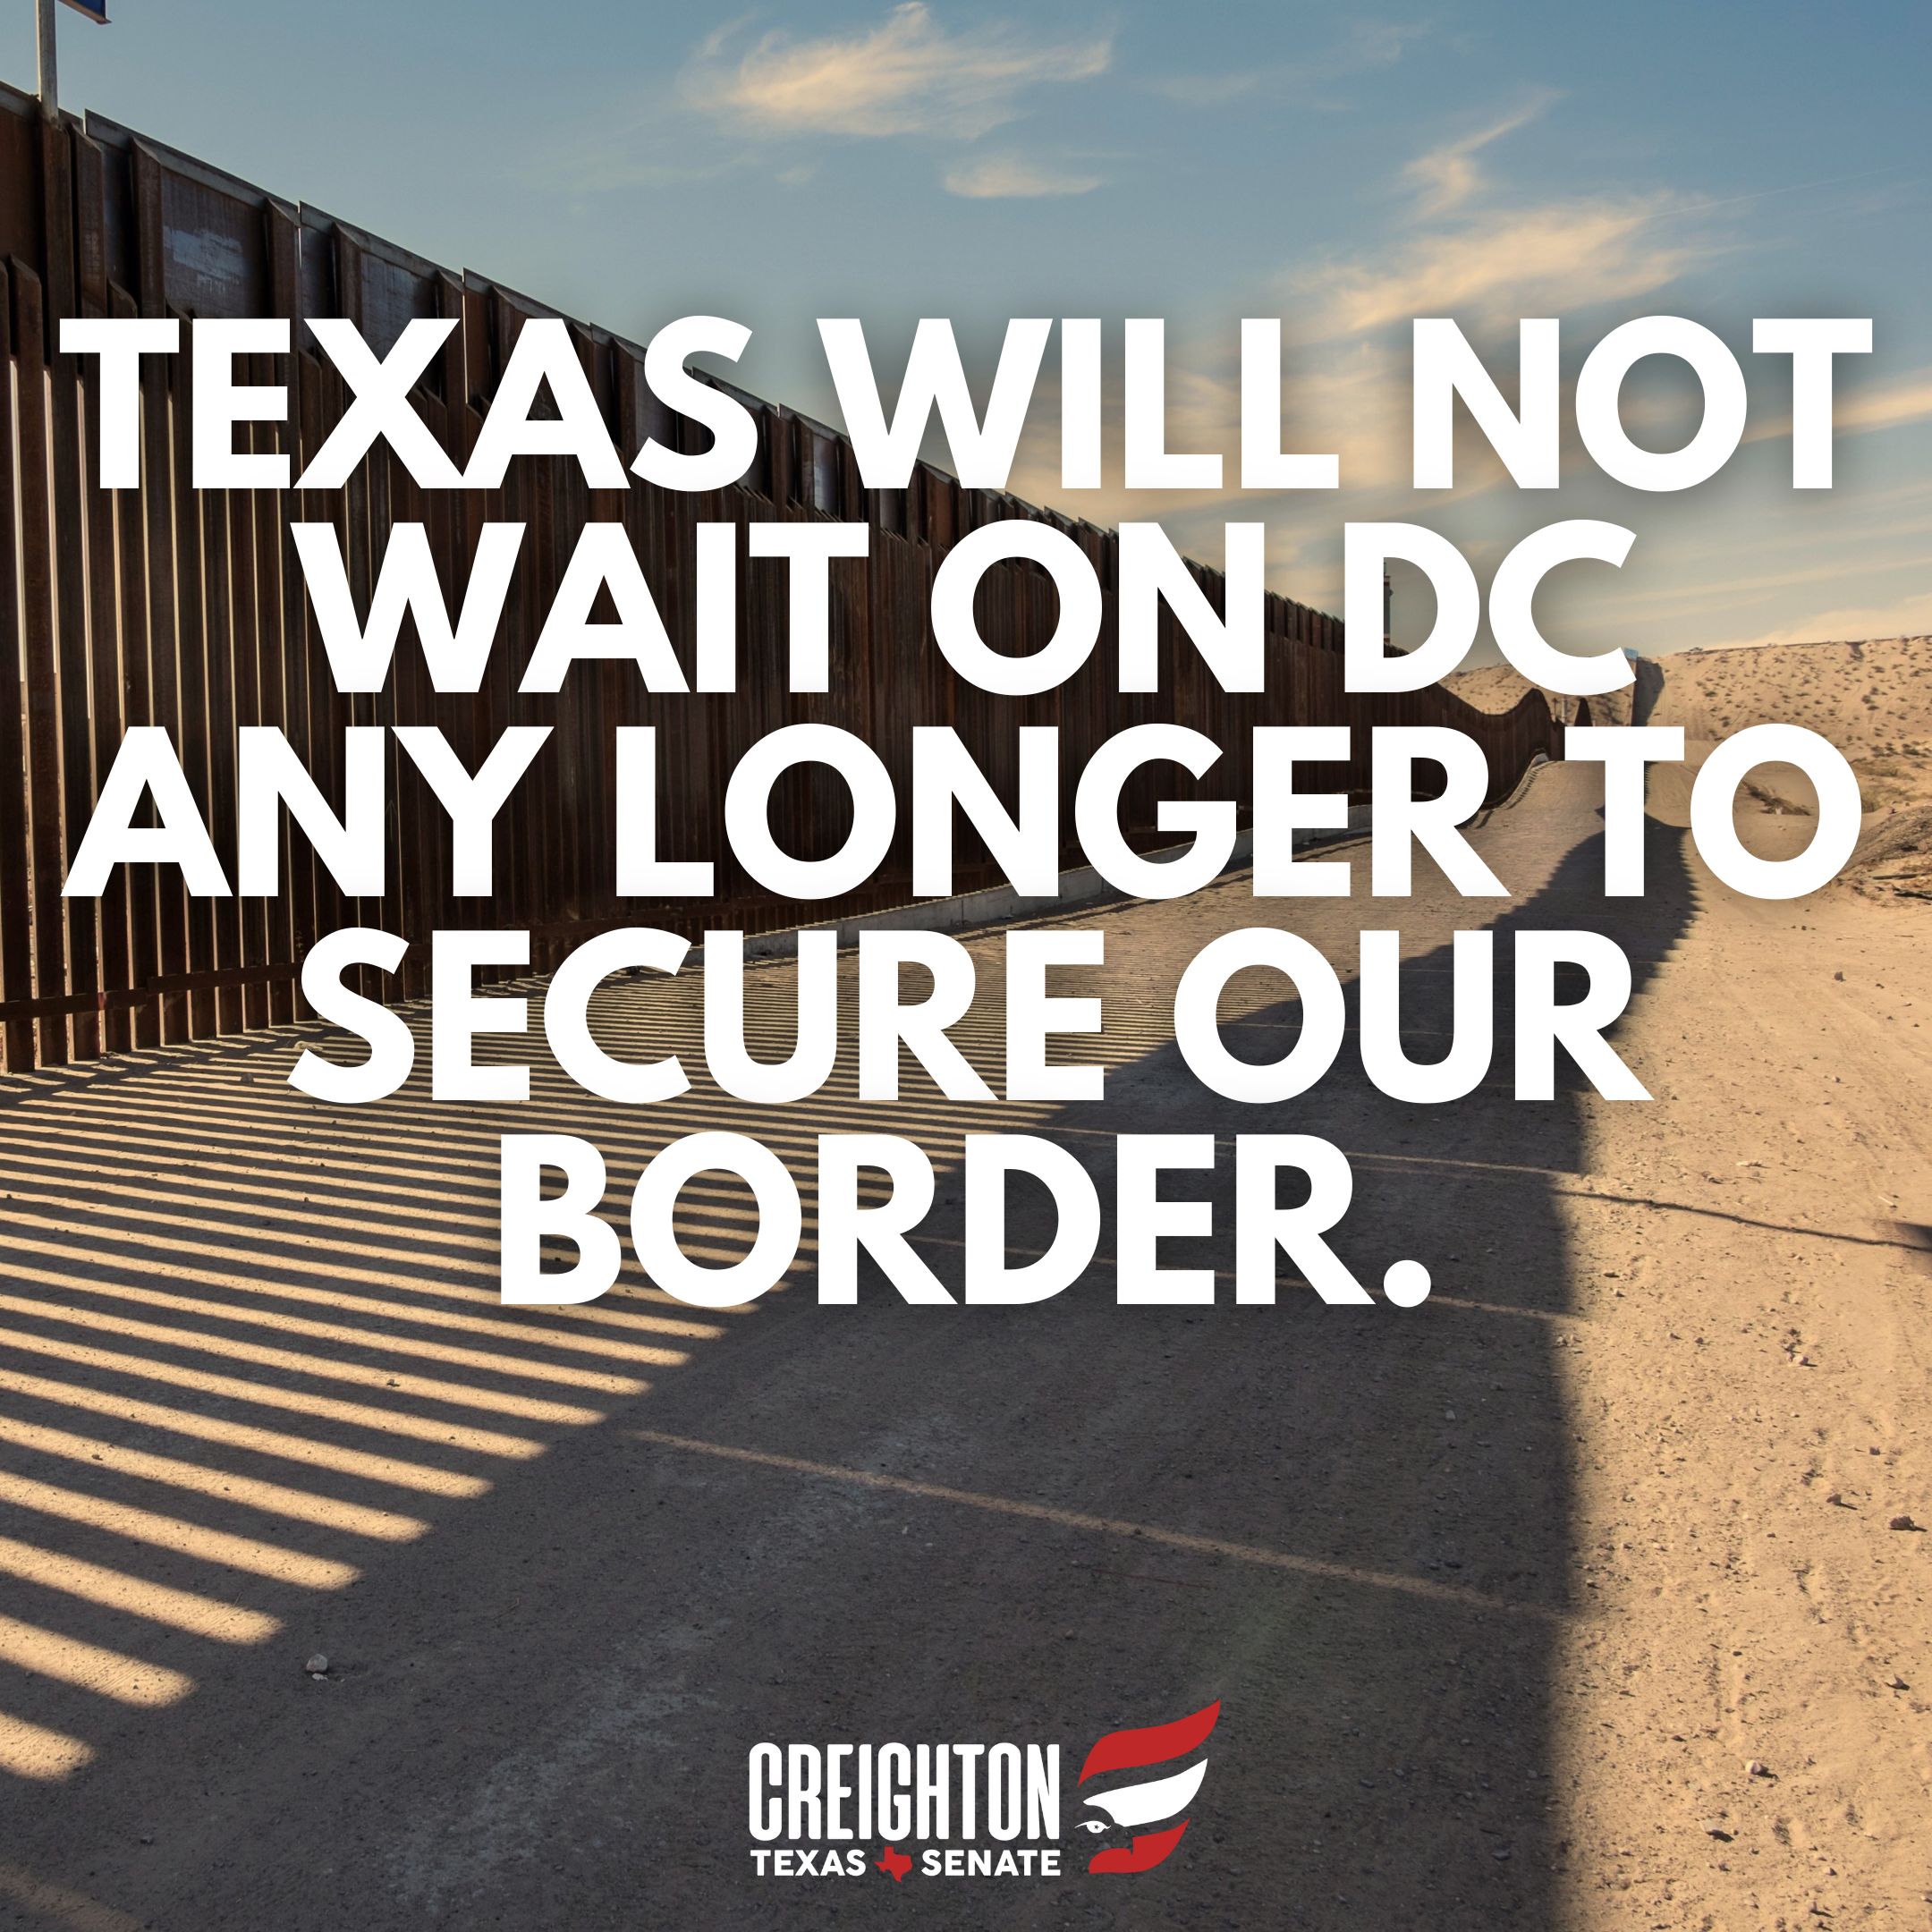 Texas – not waiting on DC to secure our border